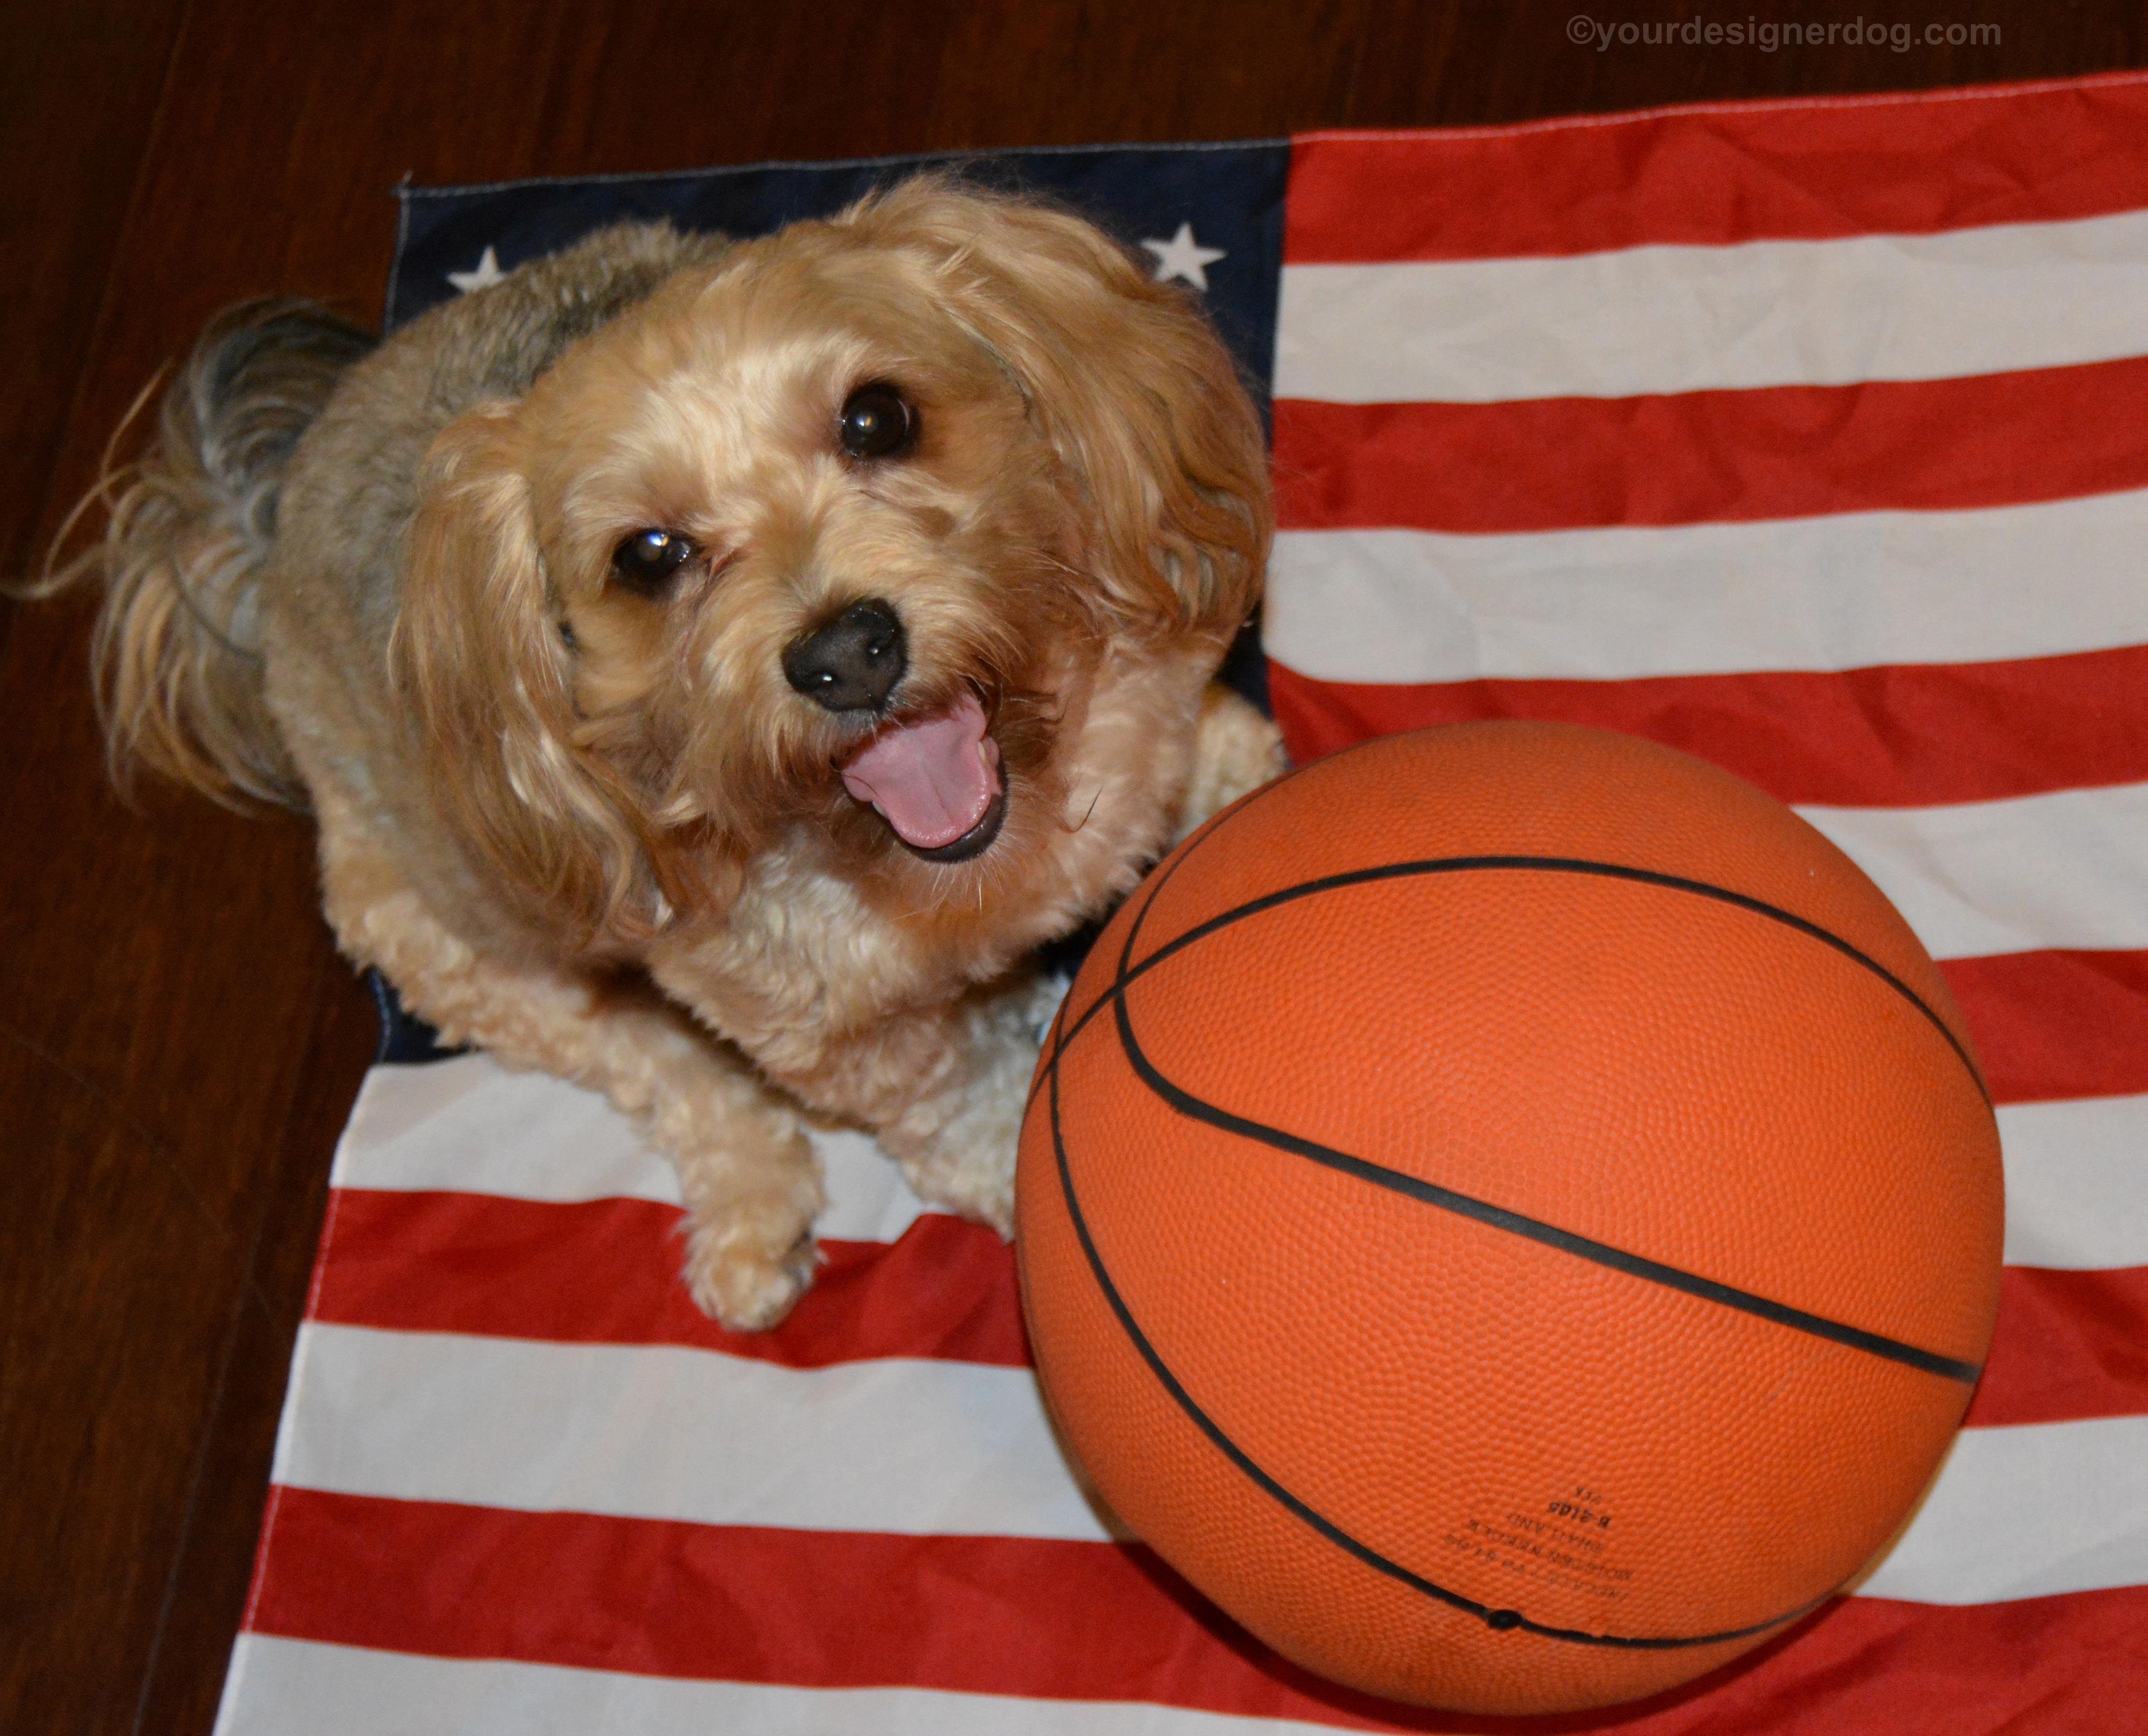 dogs, designer dogs, Yorkipoo, yorkie poo, basketball, tongue out, american flag